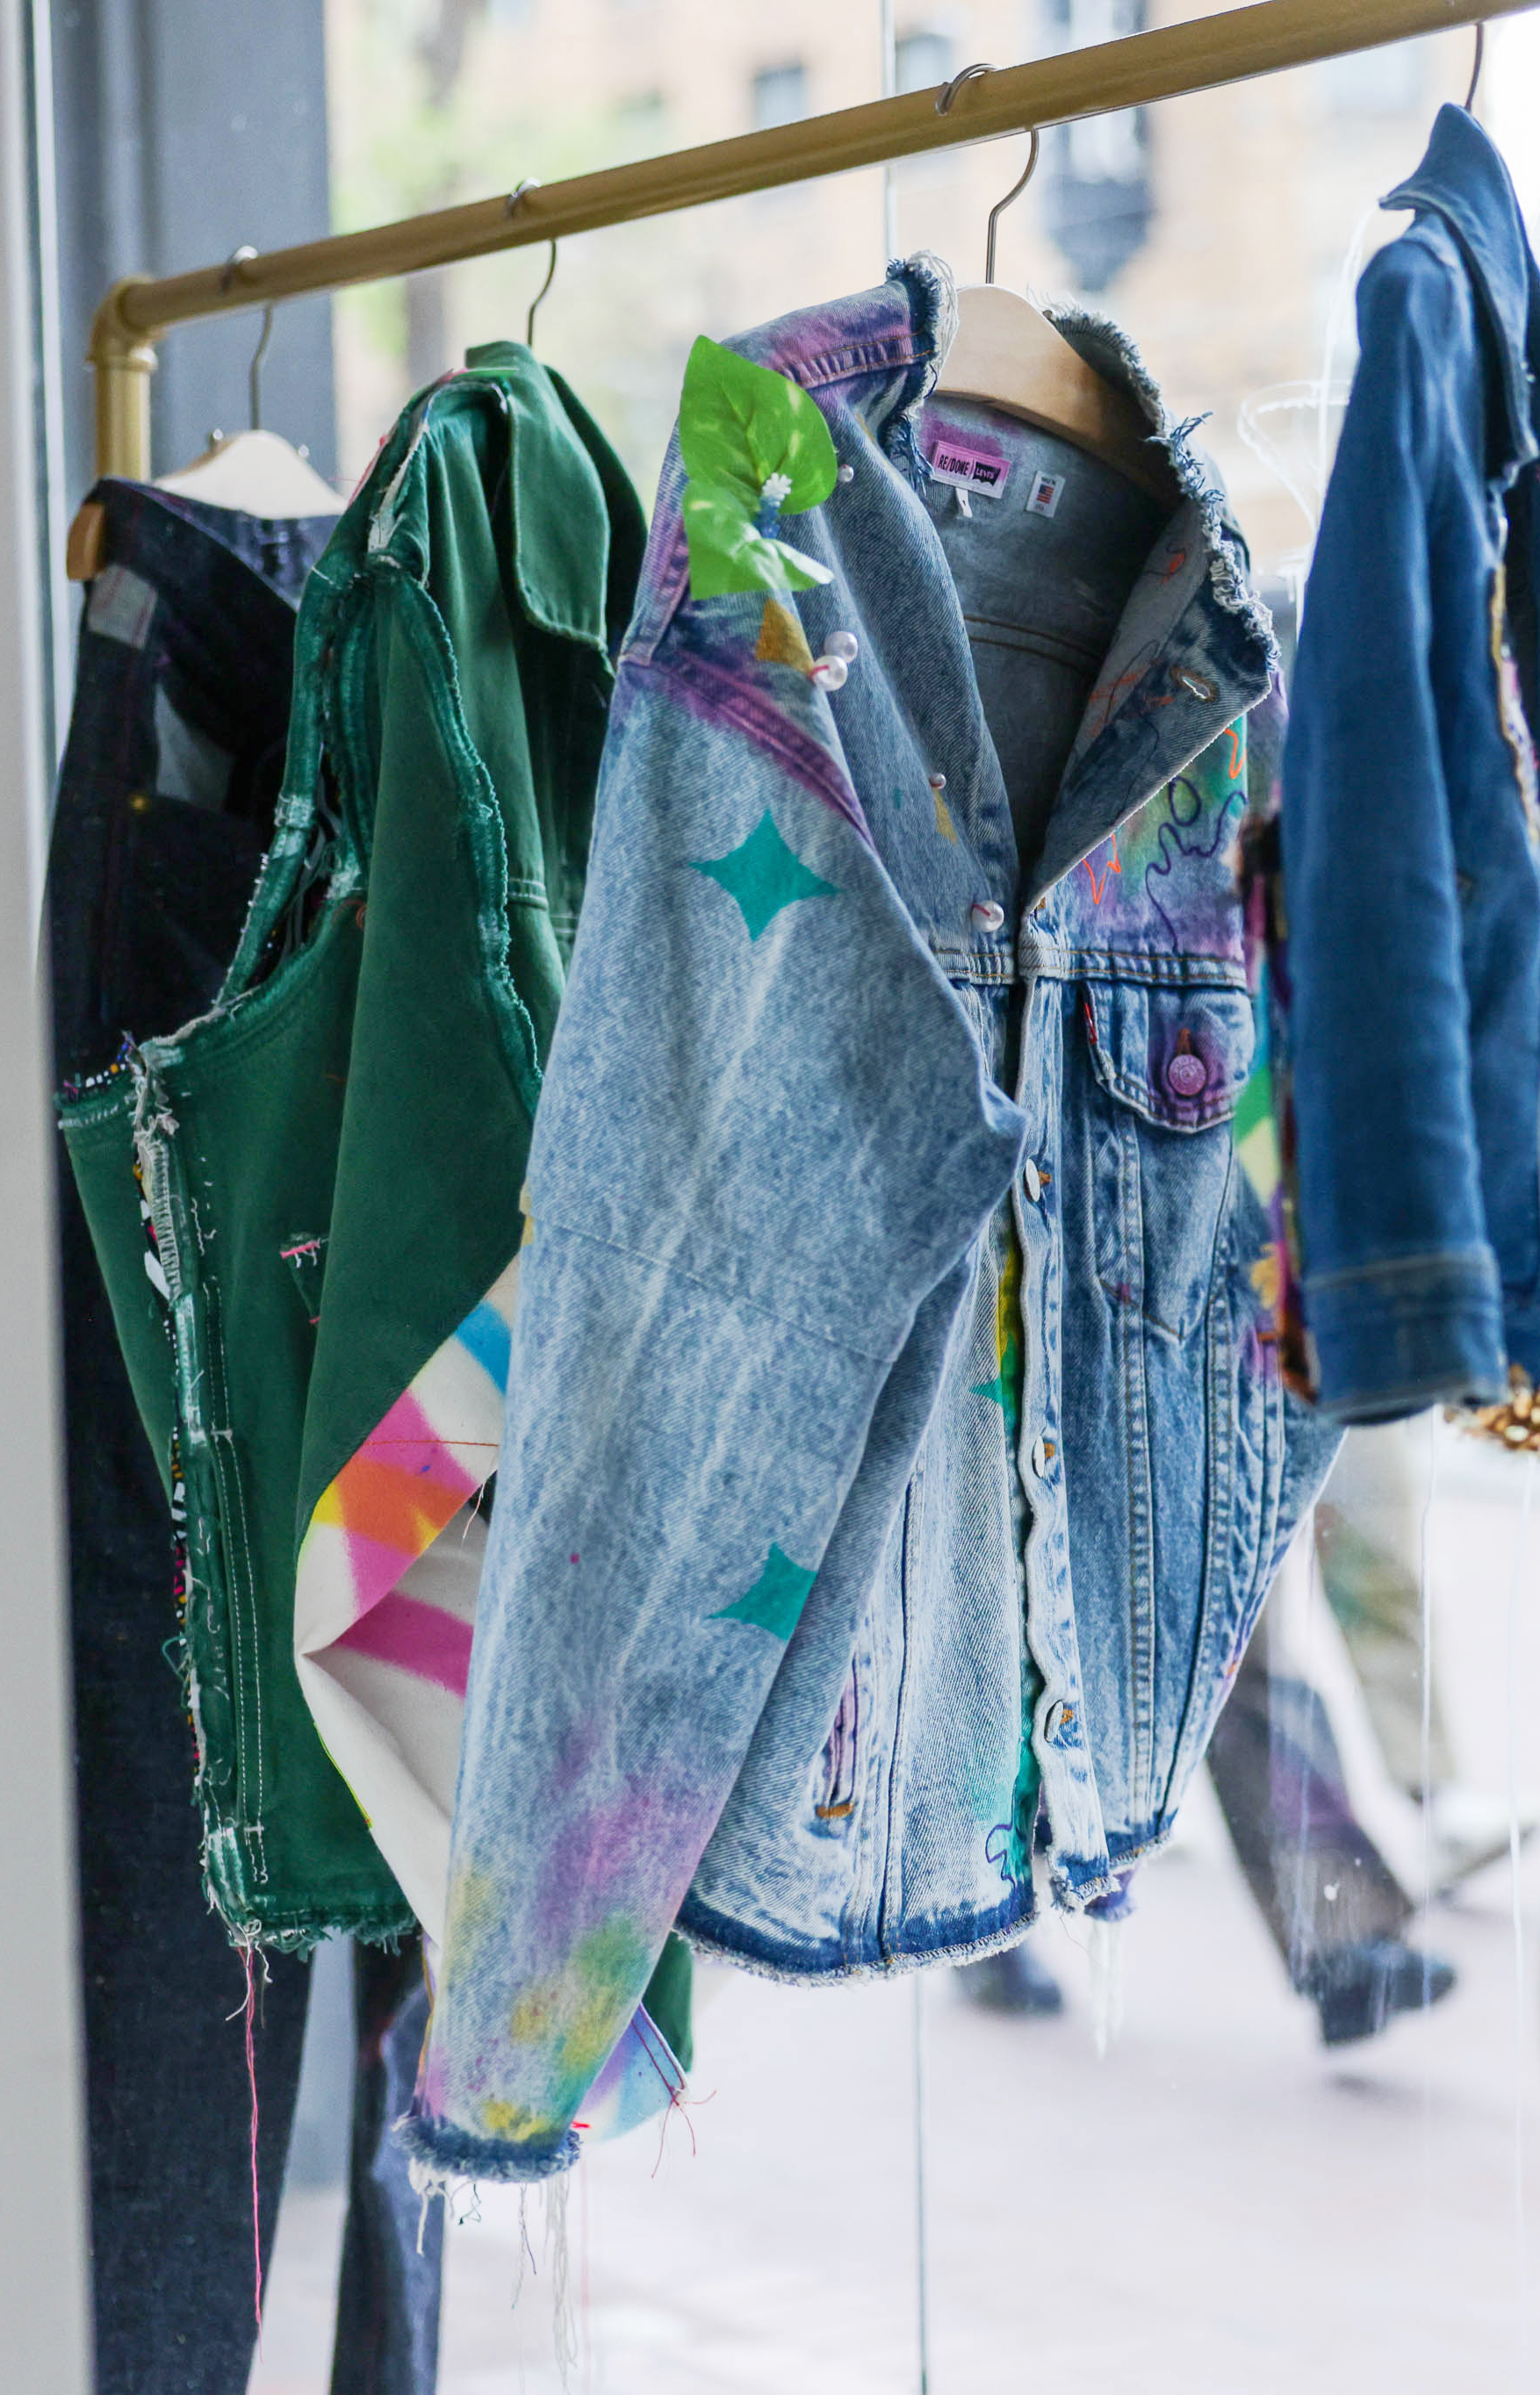 Colorful, distressed denim jackets hang on a rack, with a clear view through a window behind.